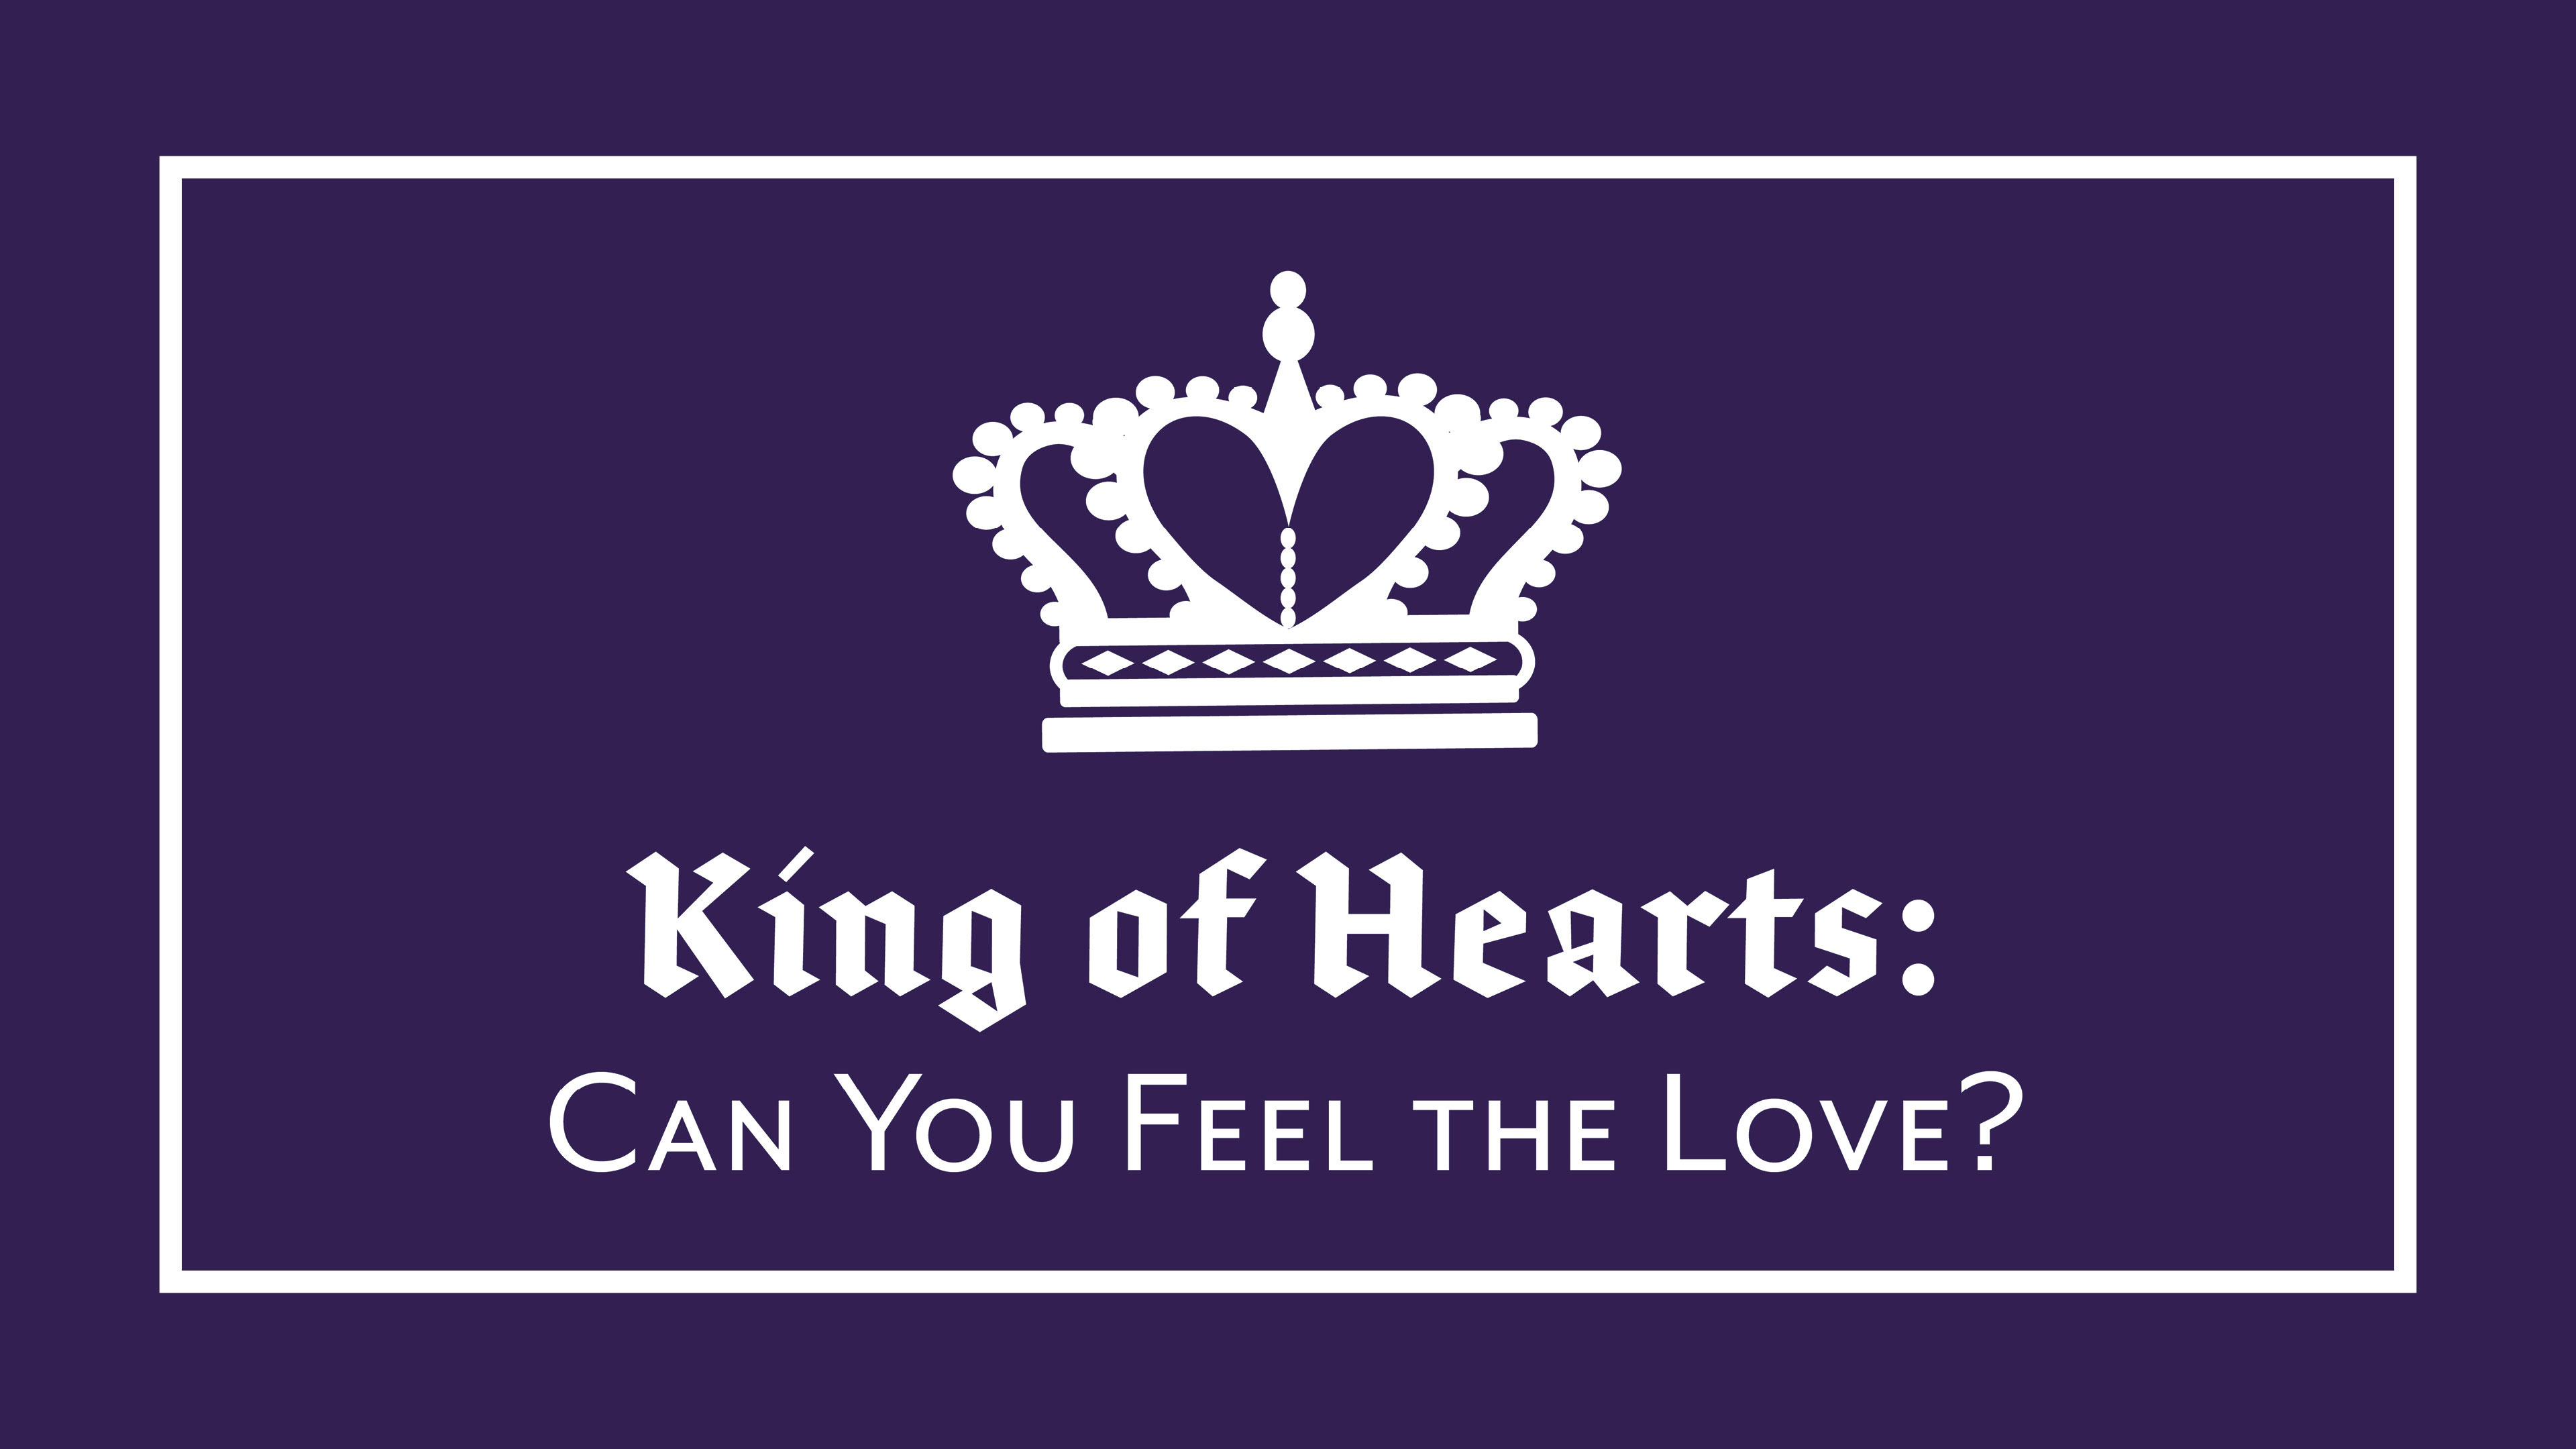 King of Hearts: Can You Feel the Love?